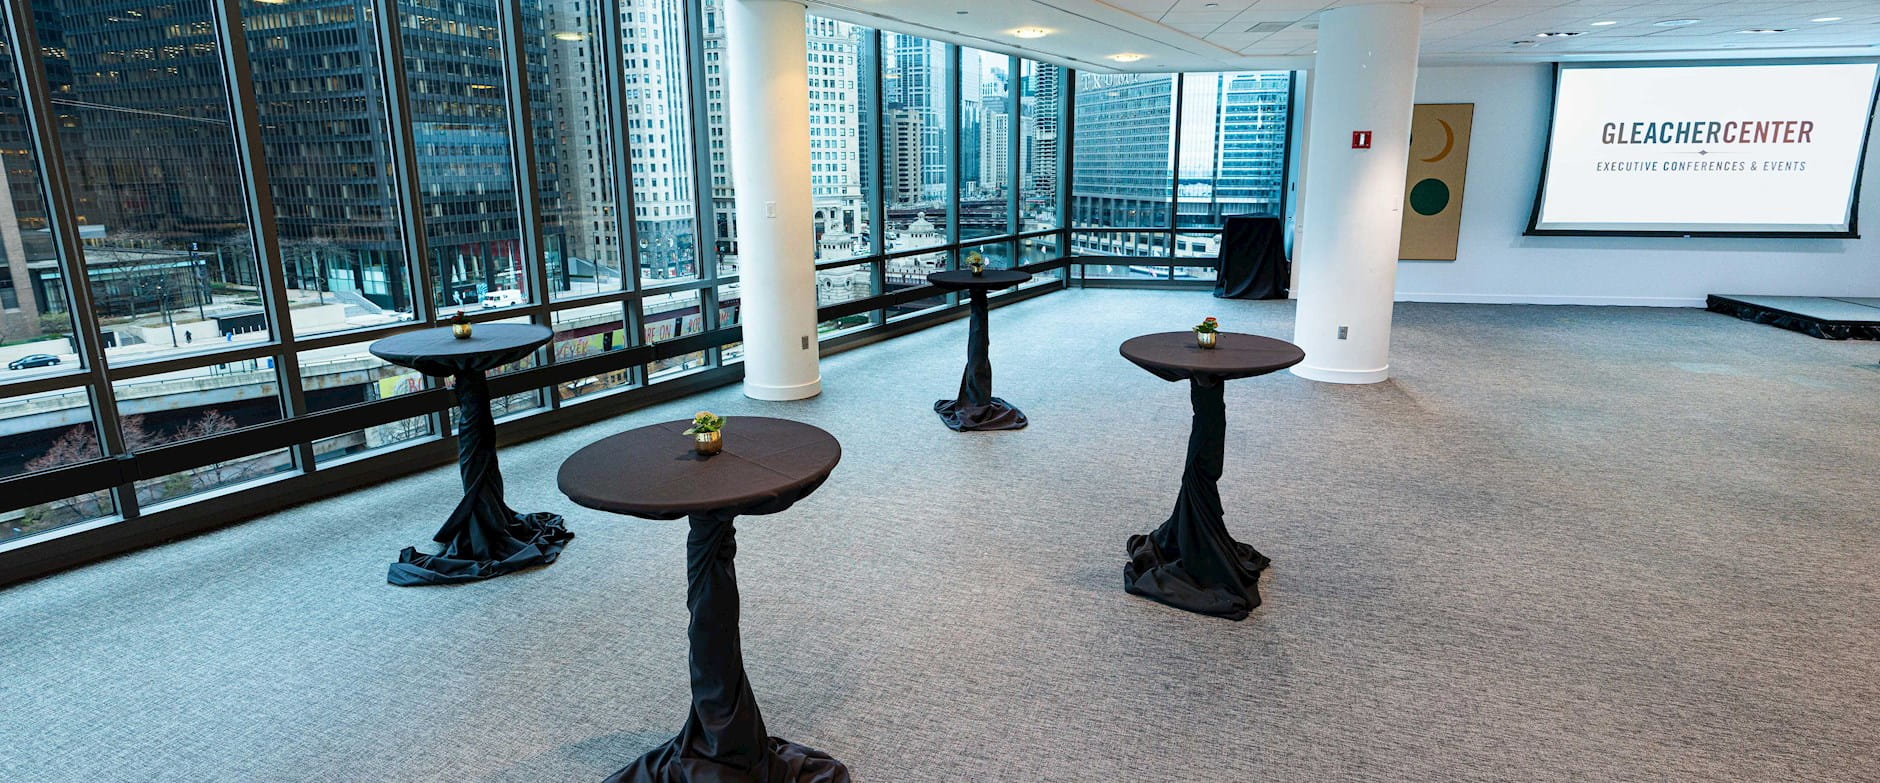 Gleacher Center conference area and cocktail tables overlooking the Chicago River